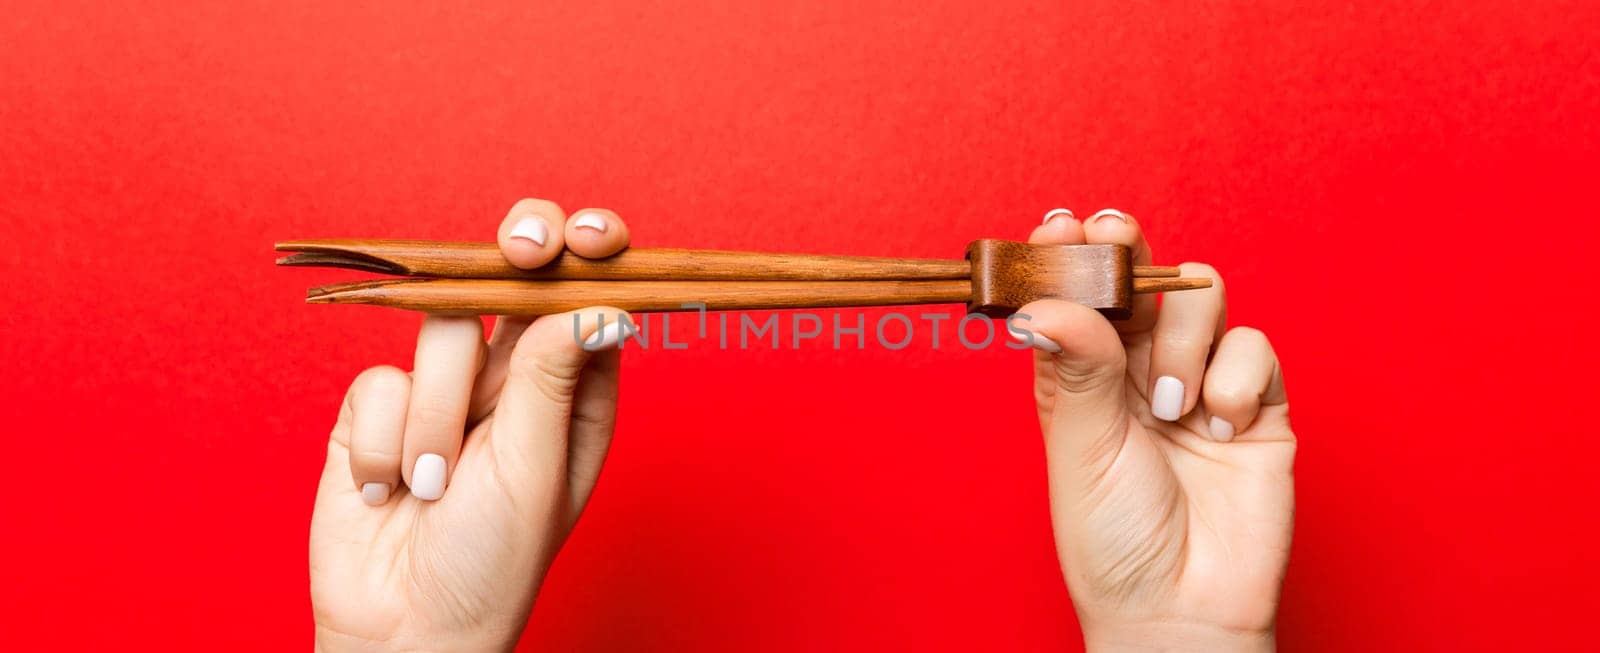 Crop image of two female hands holding chopsticks on red background. Ready to eat concept with copy space by Snegok1967